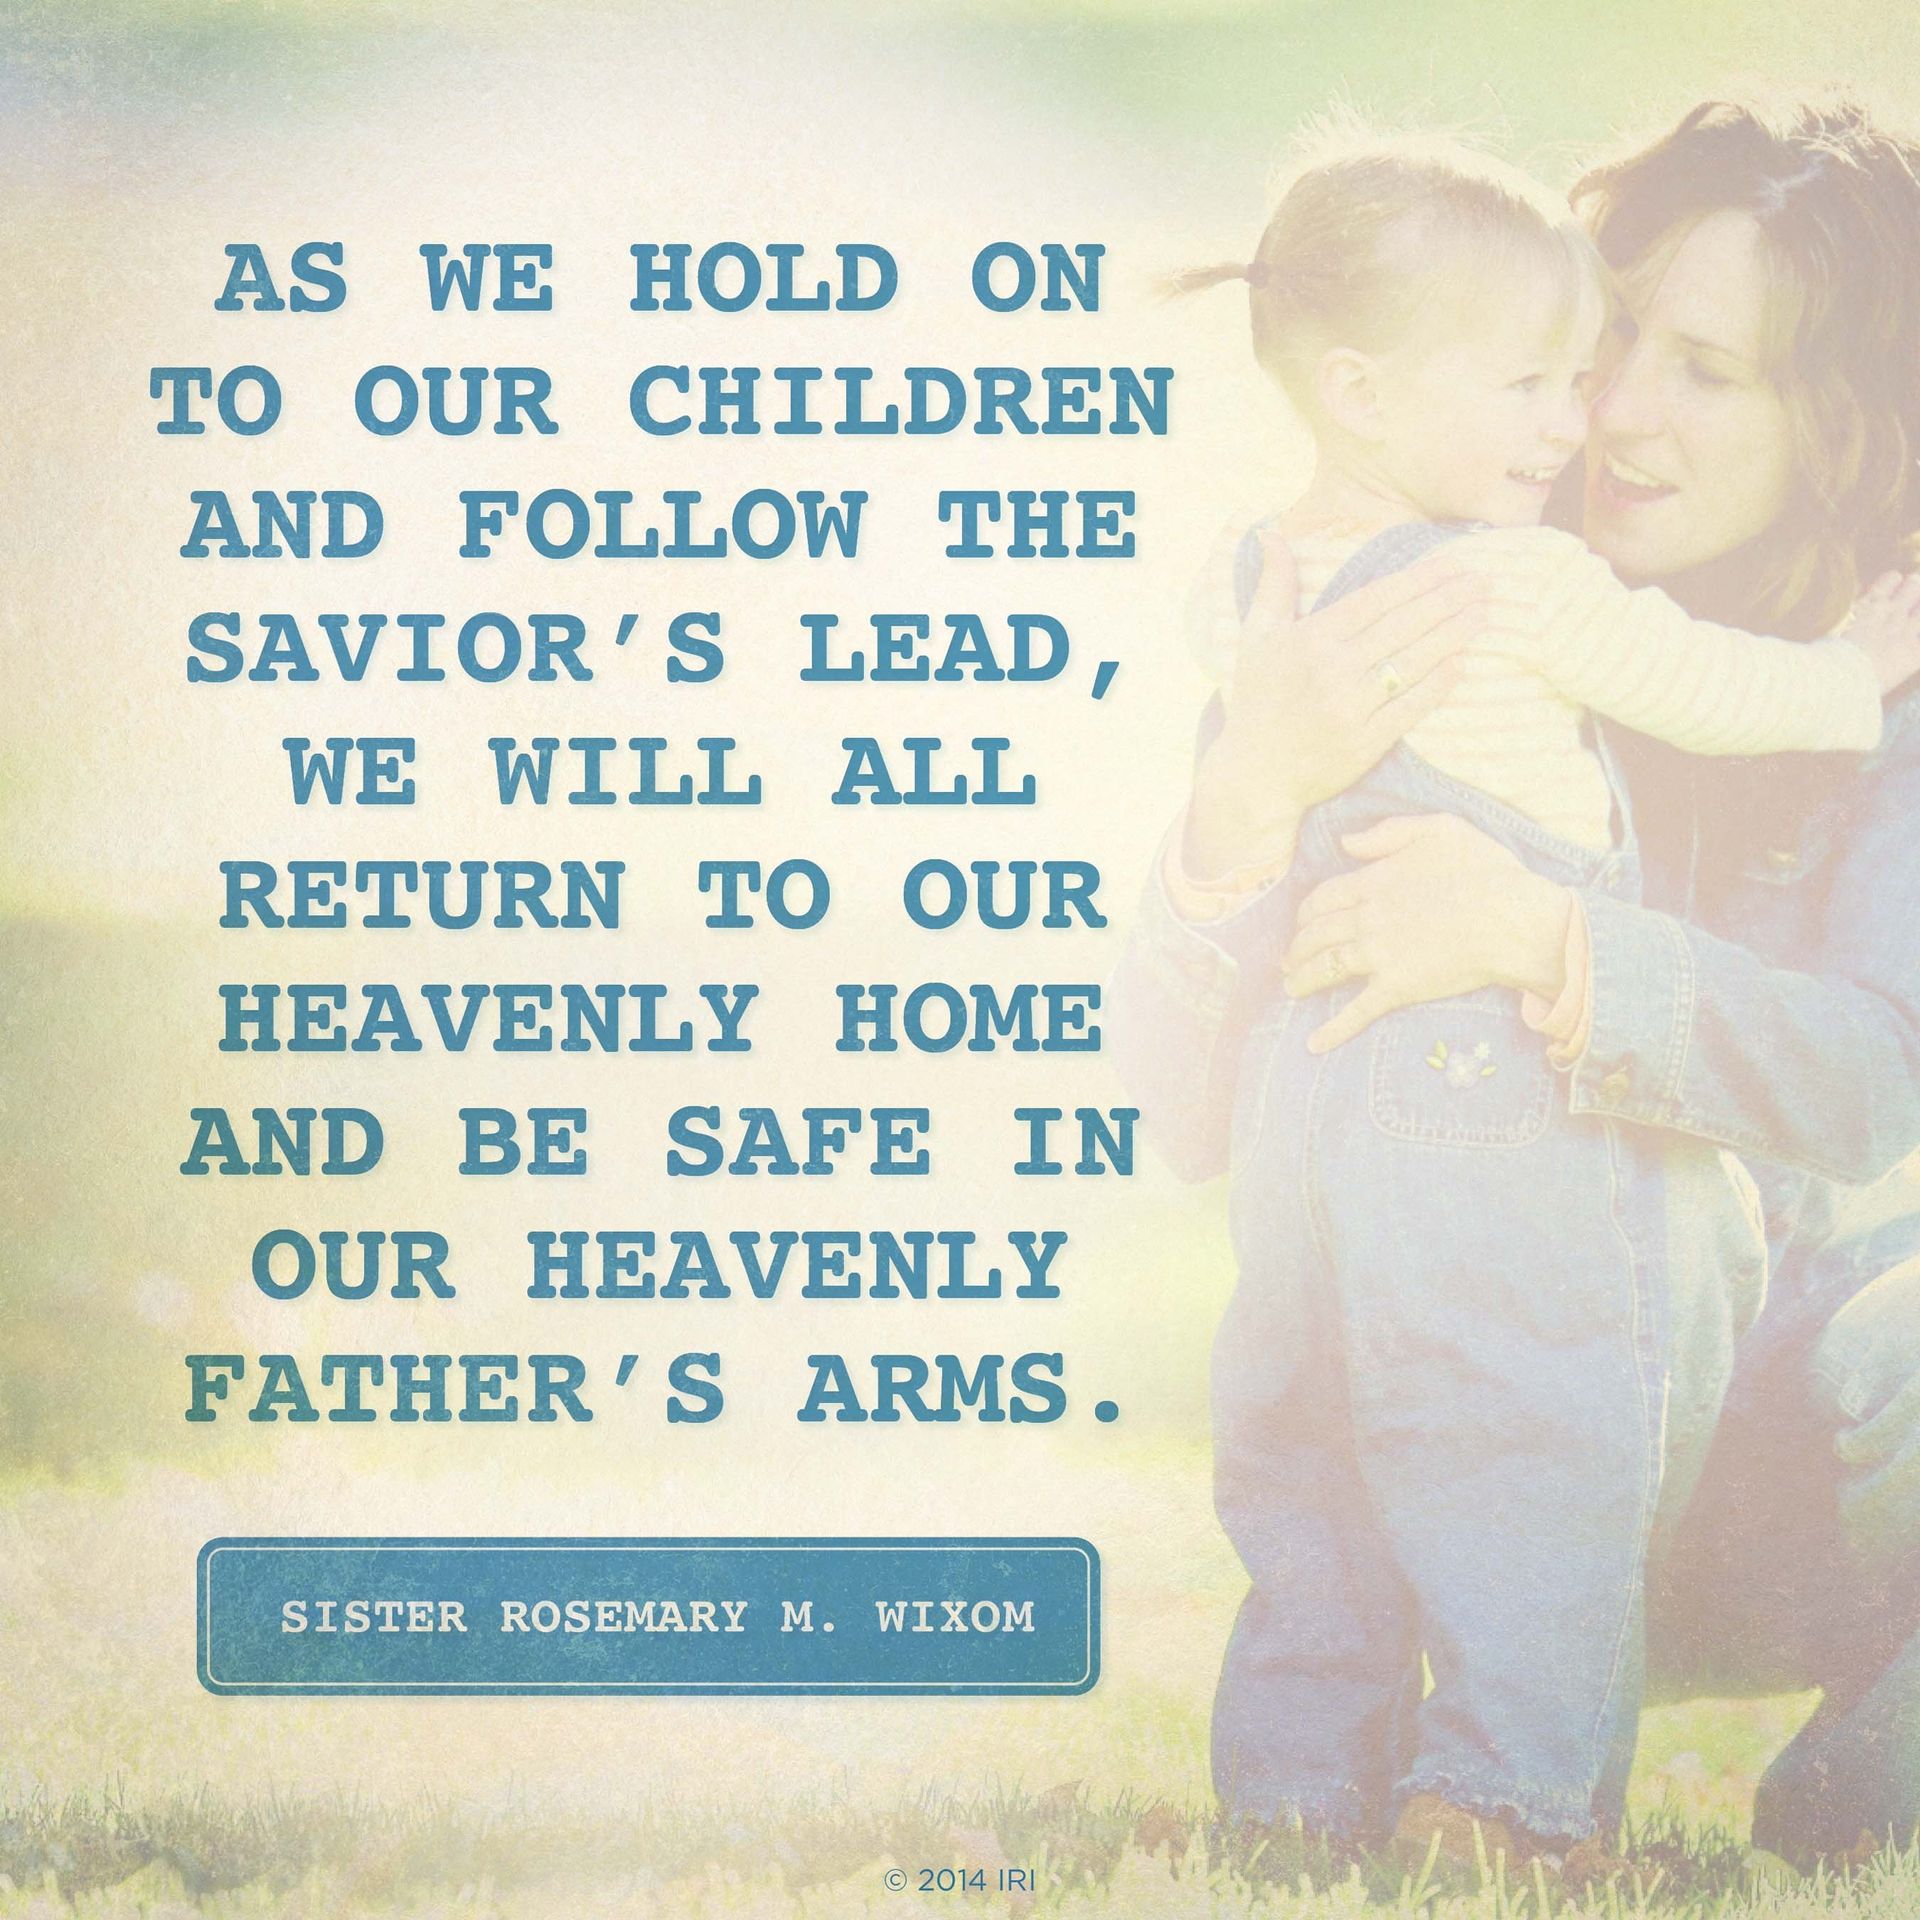 “As we hold on to our children and follow the Savior’s lead, we will all return to our heavenly home and be safe in our Heavenly Father’s arms.”—Sister Rosemary M. Wixom, “Stay on the Path”